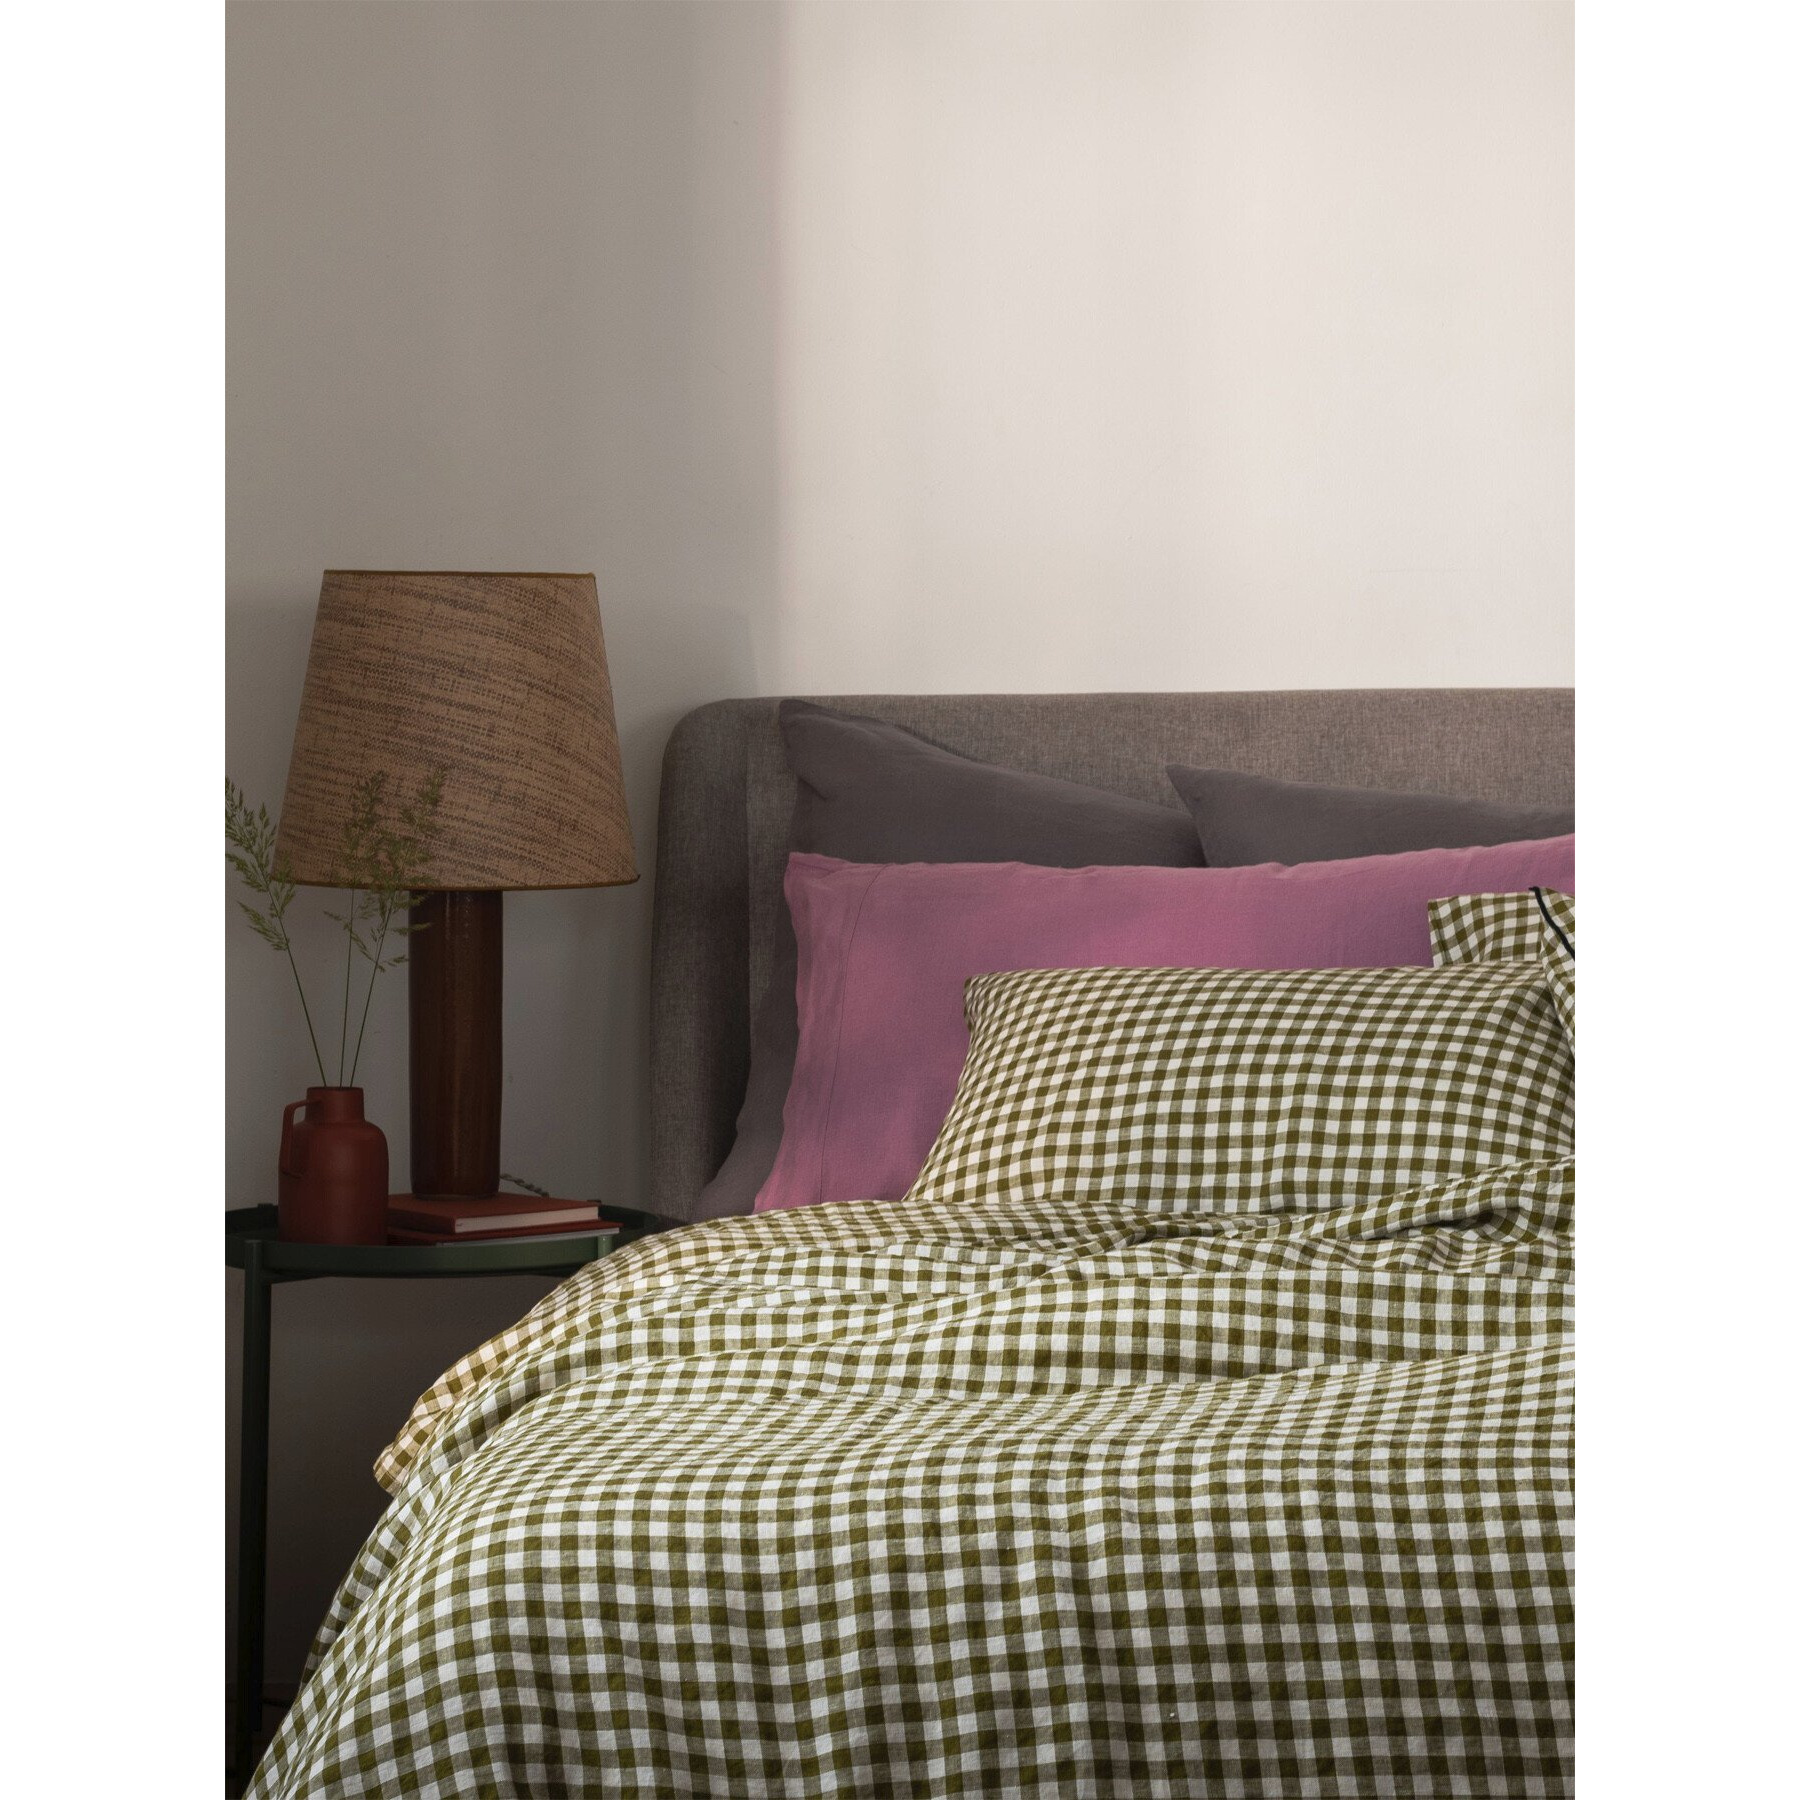 Piglet in Bed Gingham Linen Flat Sheet - Size Double Green - image 1